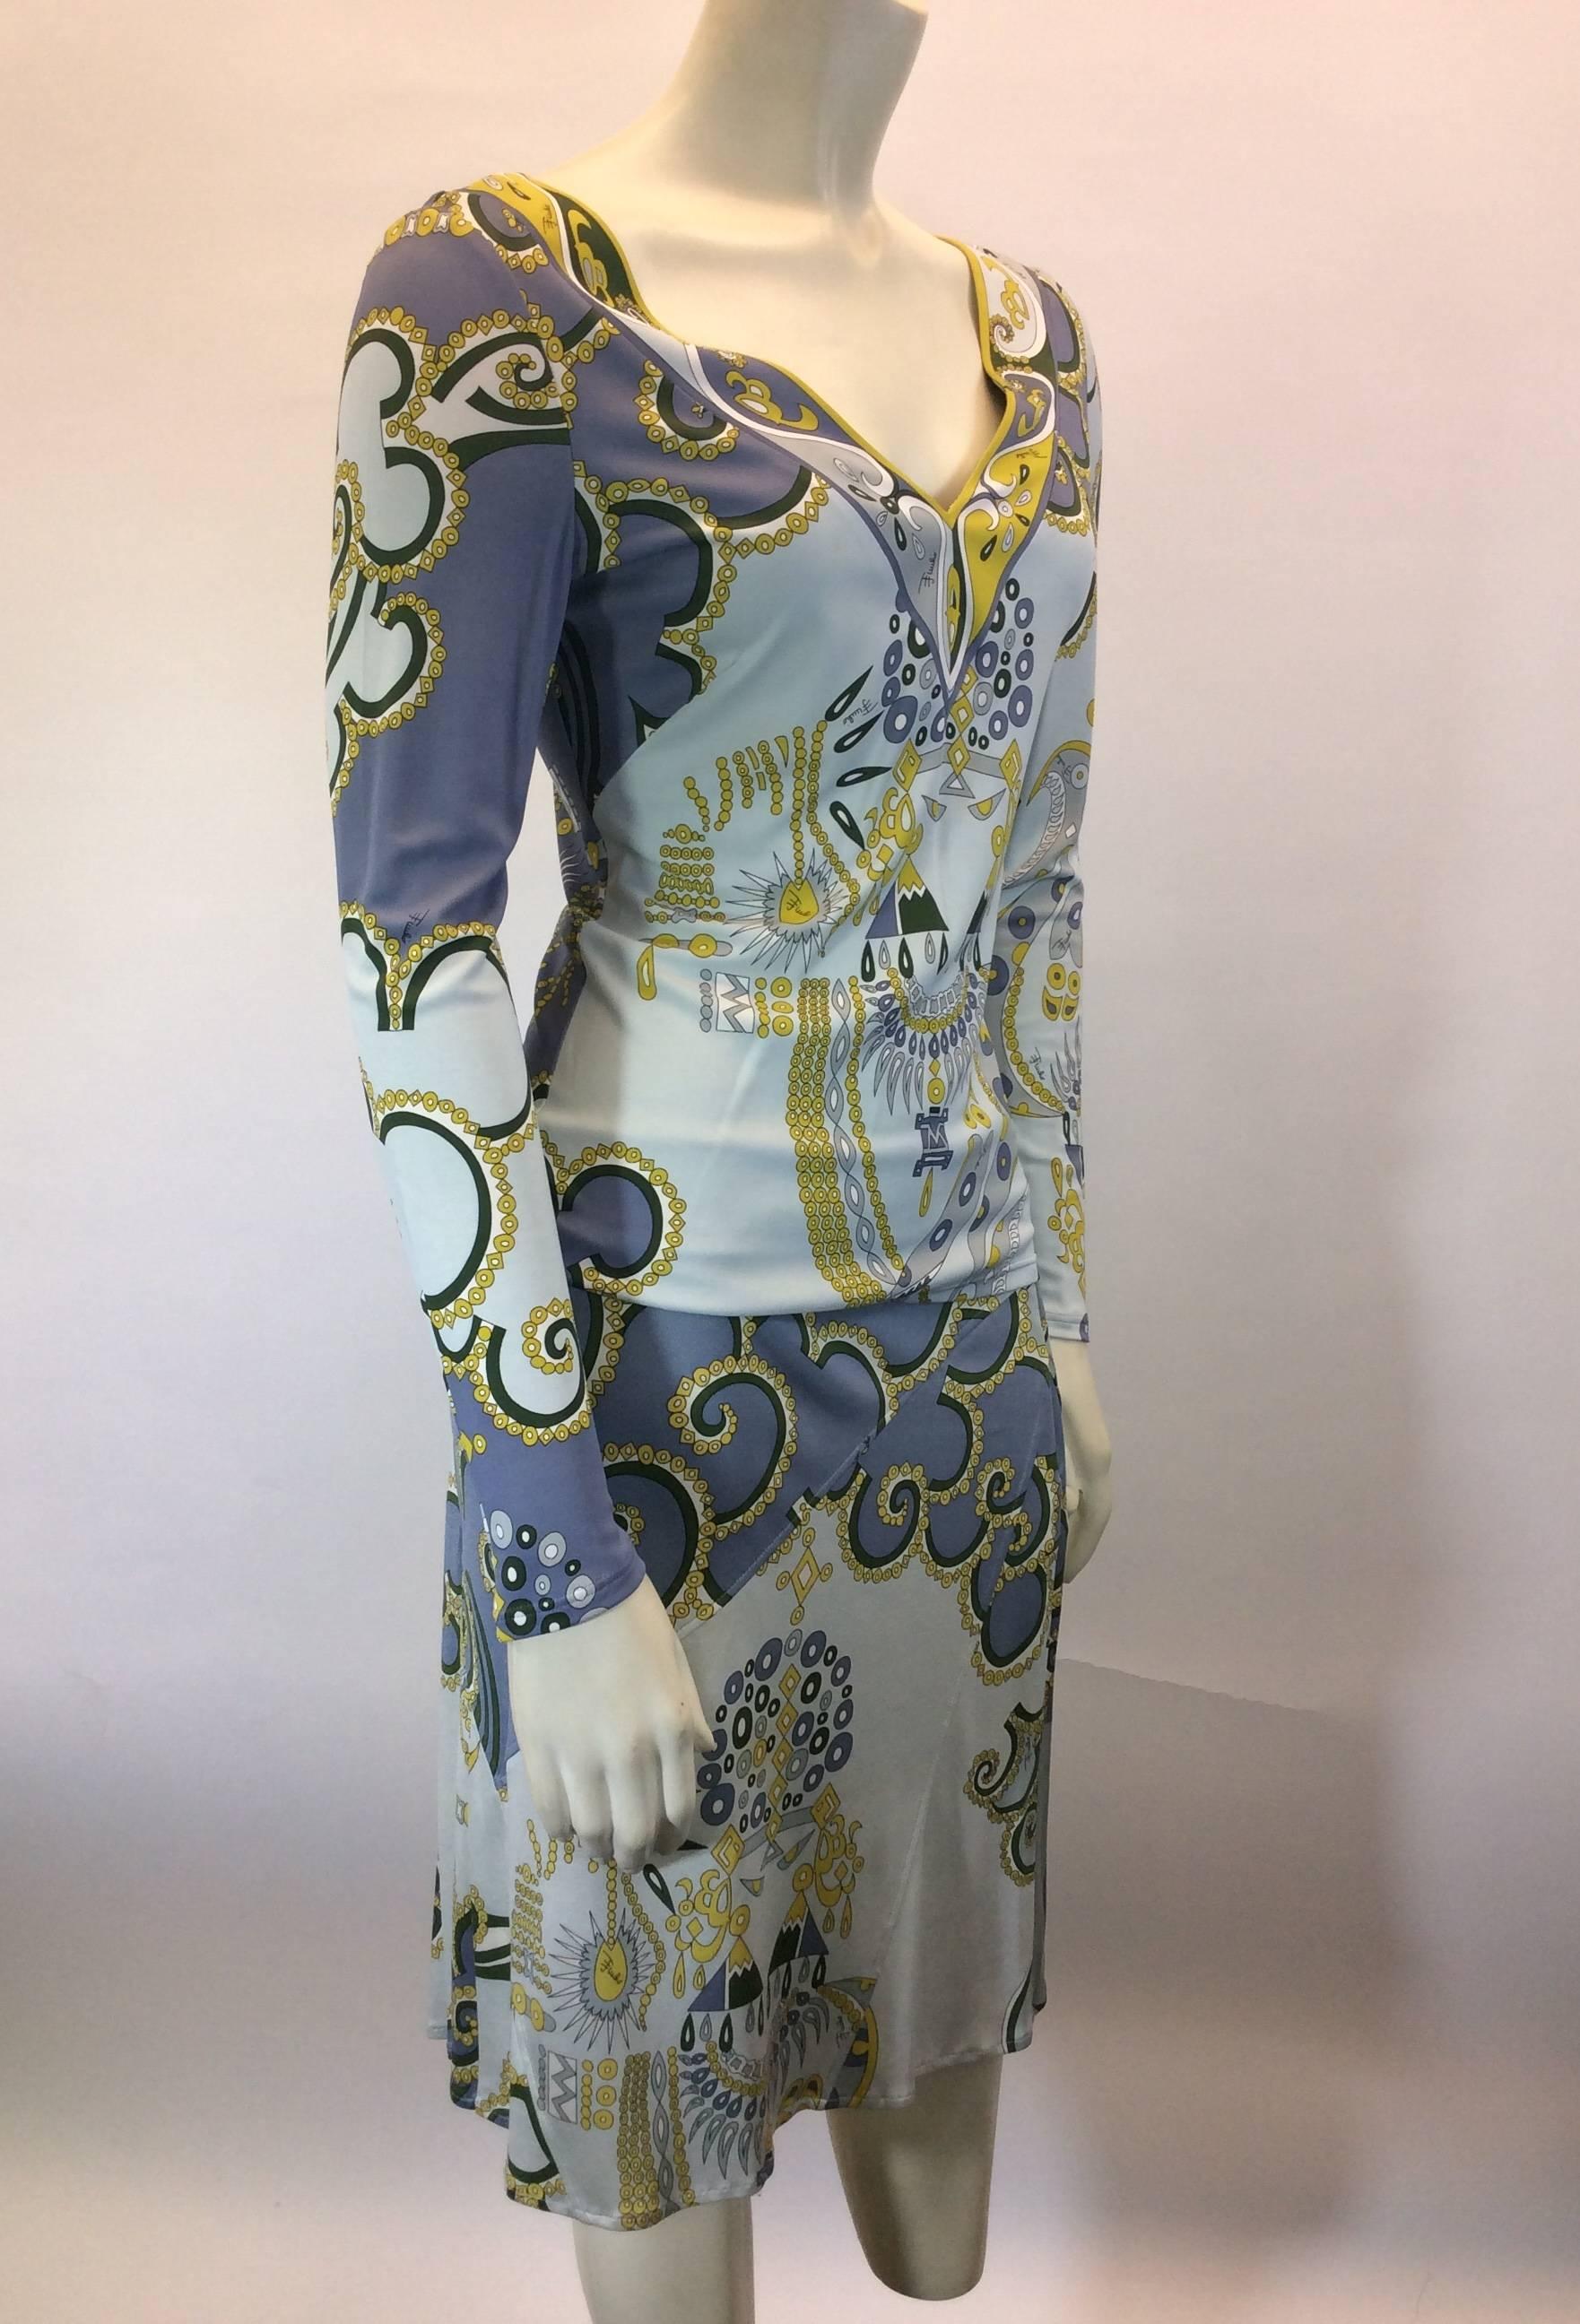 Emilio Pucci Blouse and Skirt Set
Yellow, Green Accents on shades of Blue Graphics 
Easily Slip on Blouse
Hidden Side Zipper on Skirt